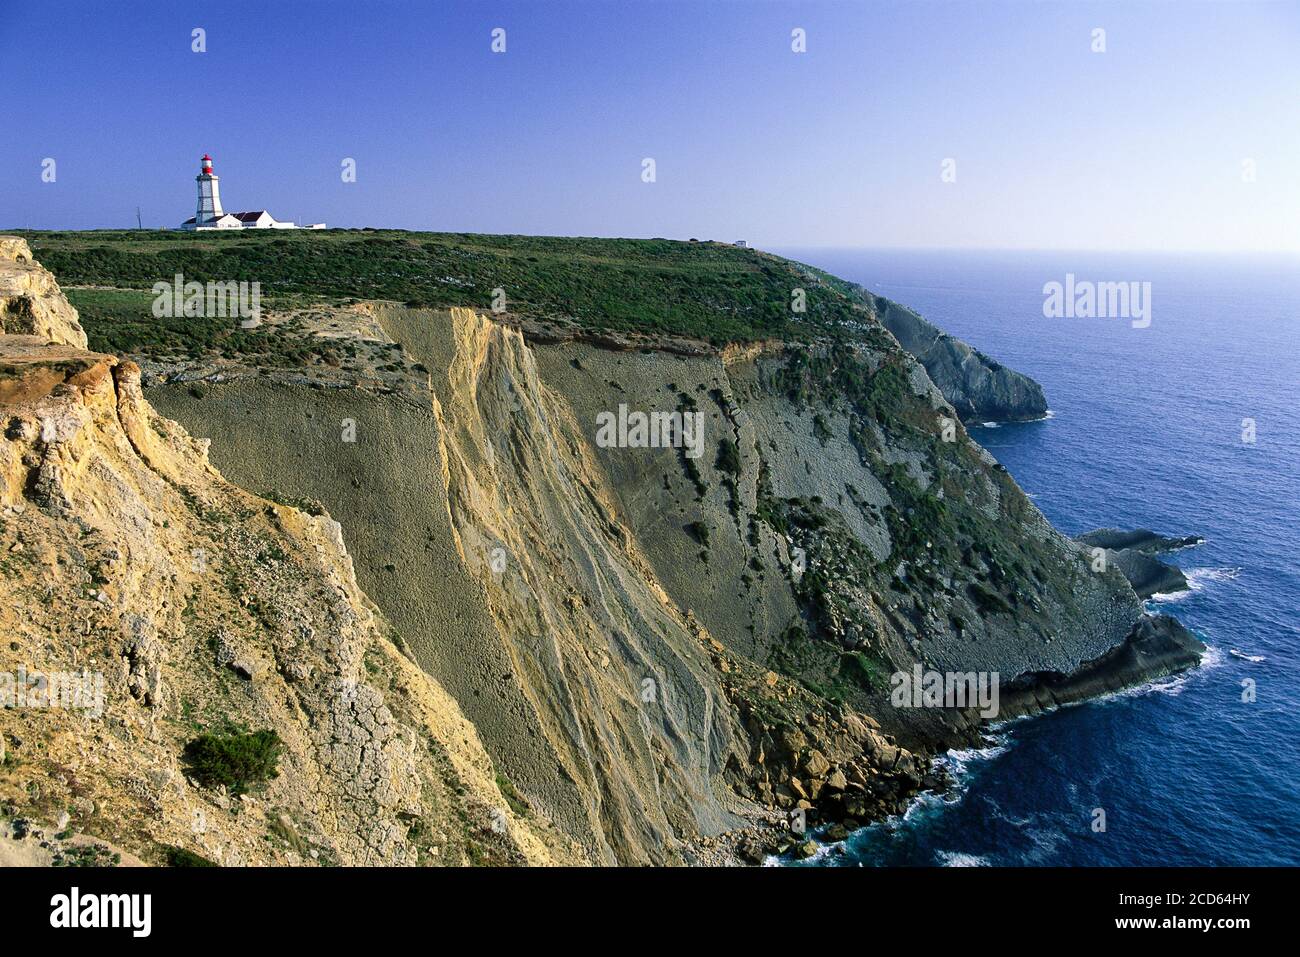 Landscape with lighthouse and cliffs, Cape Espichel, Portugal Stock Photo